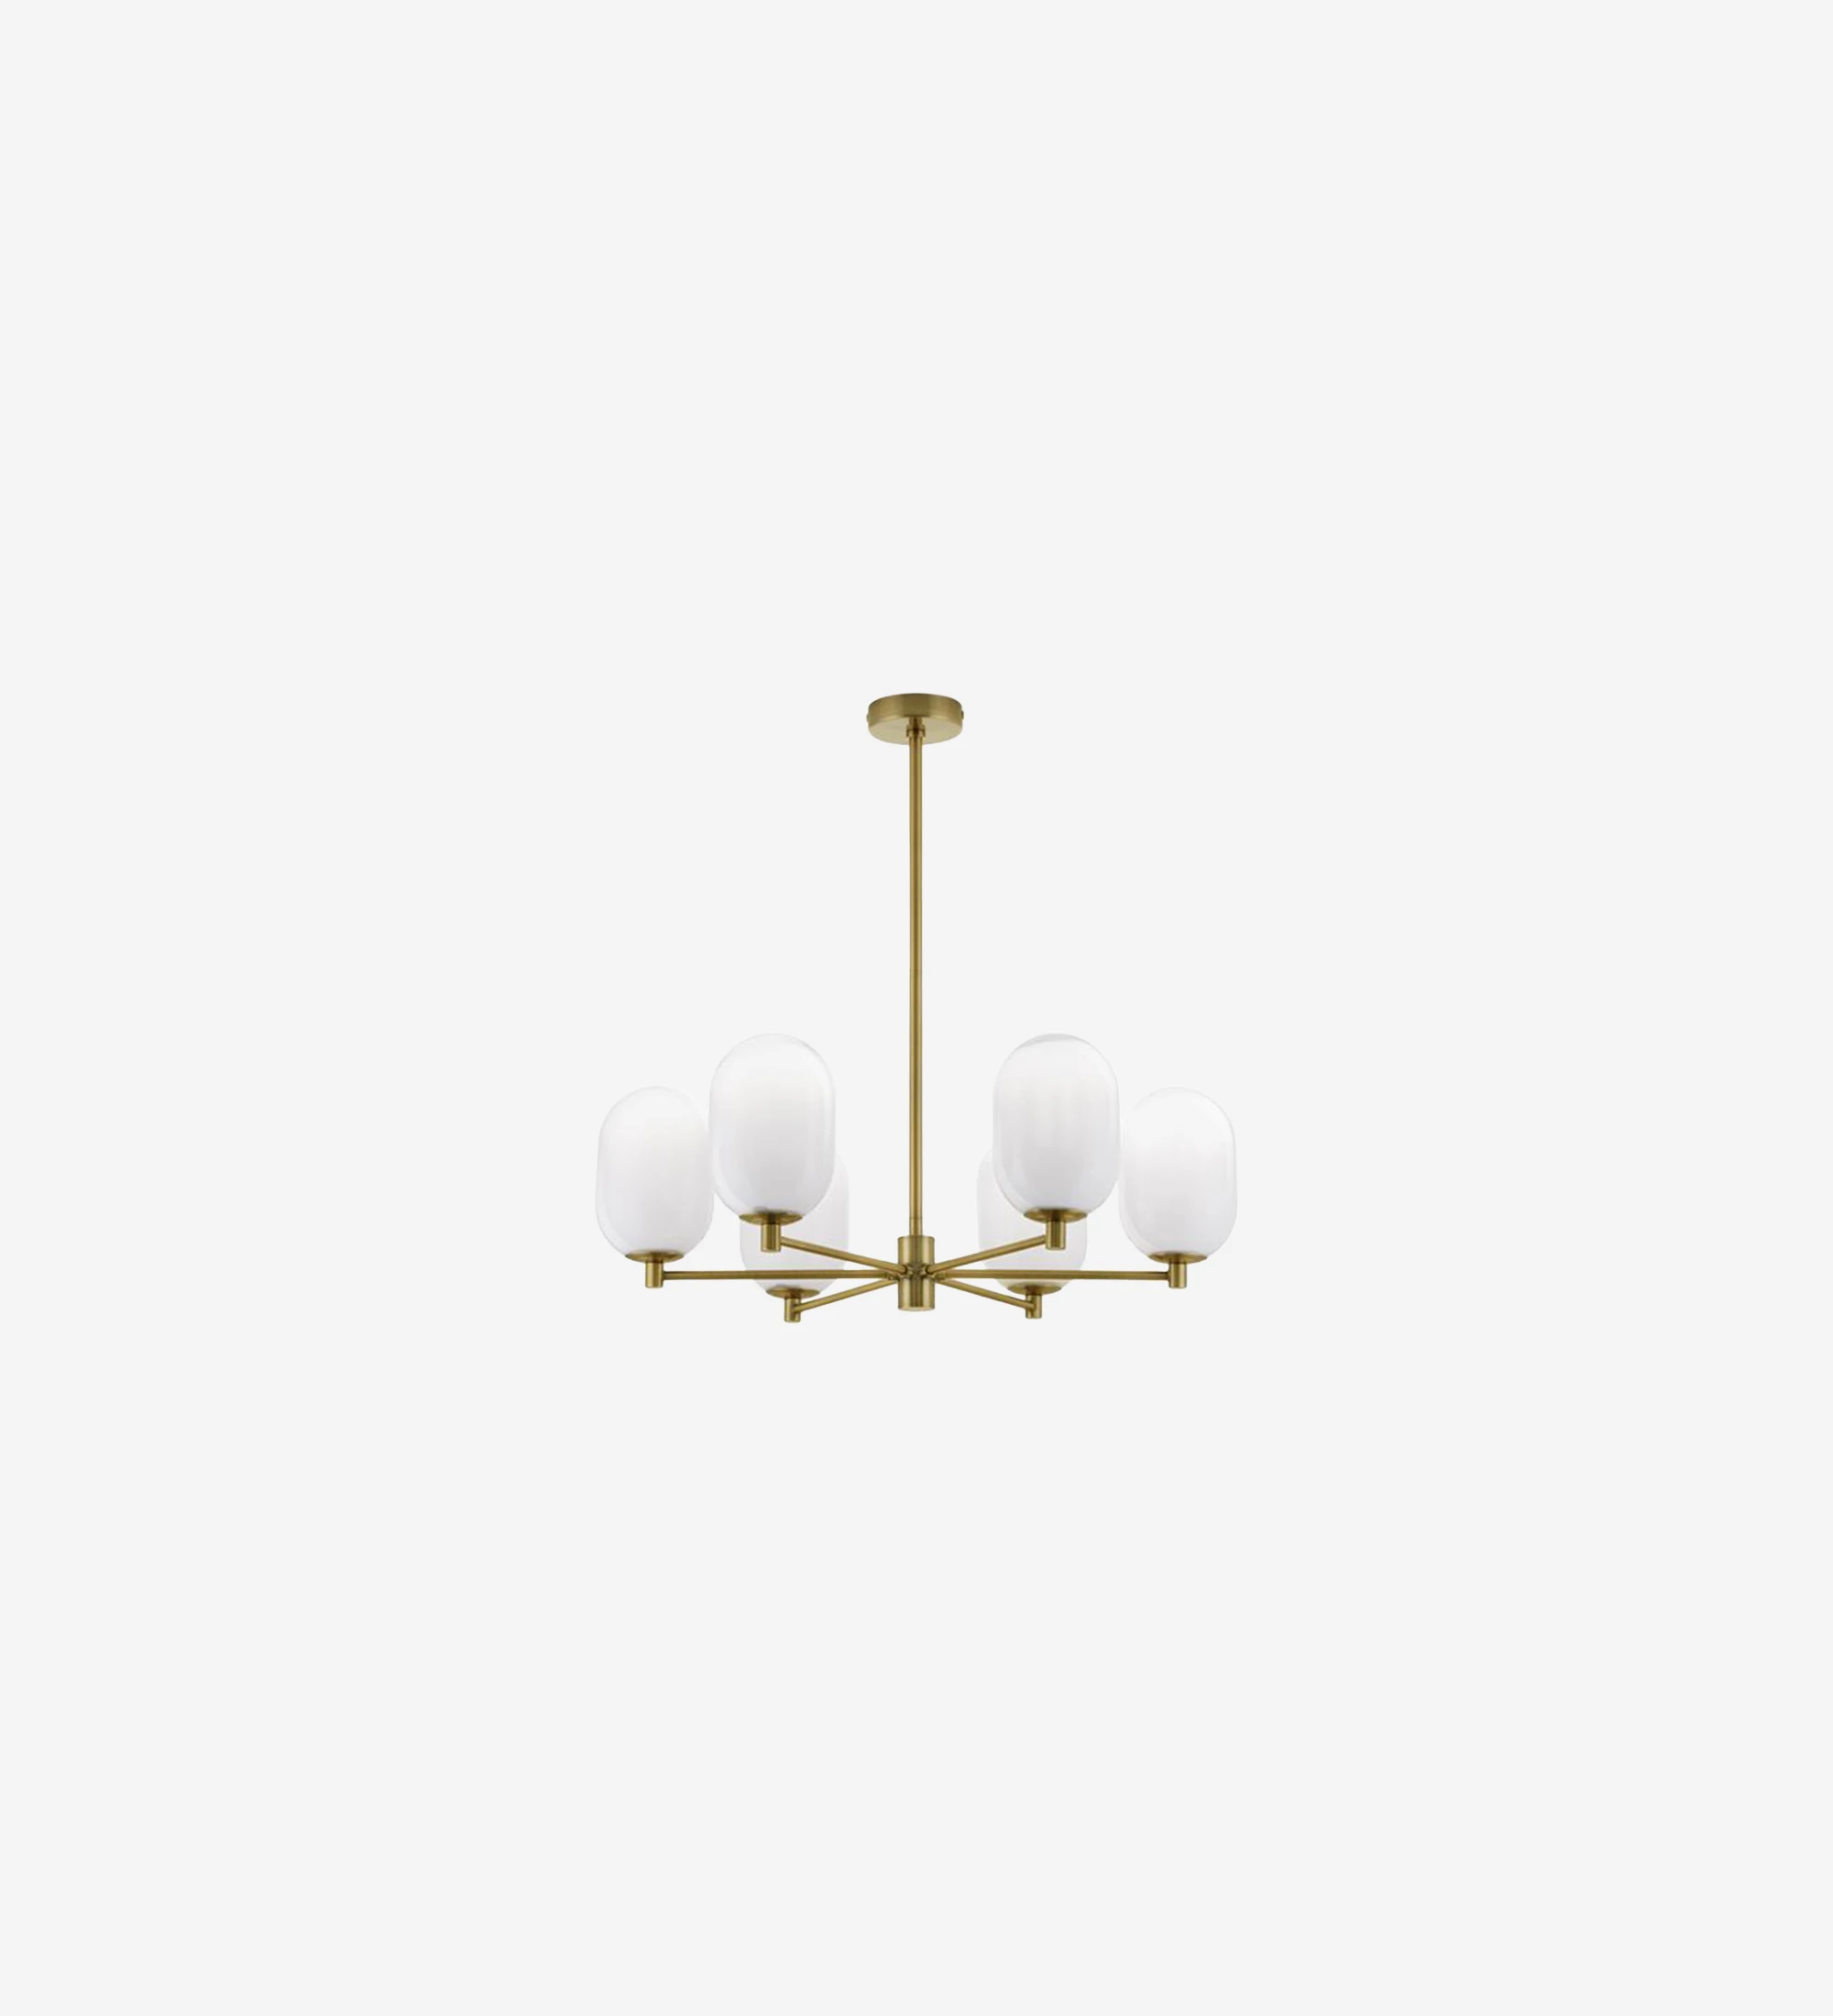  Suspension lamp in golden metal and frosted glass diffusers.